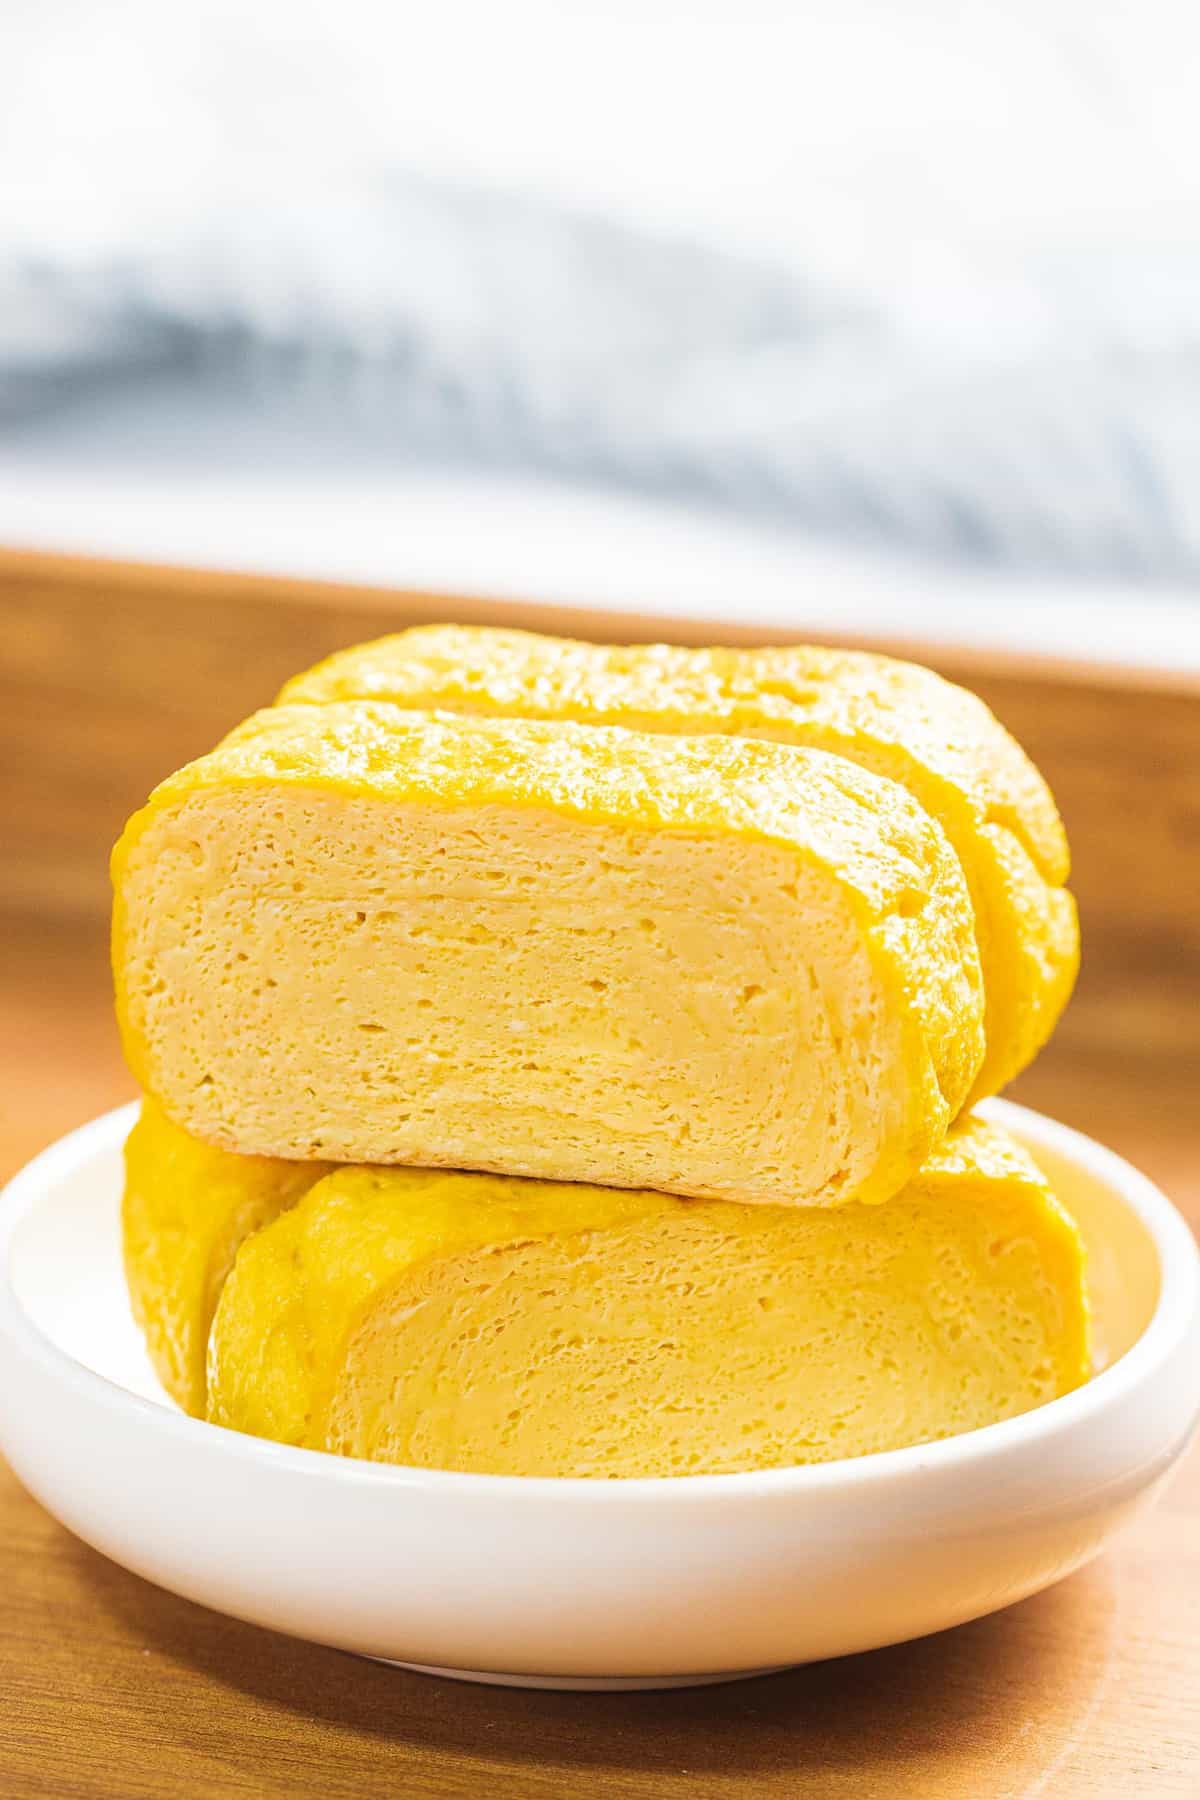 Tamagoyaki or Japanese rolled omelette in a small white bowl.